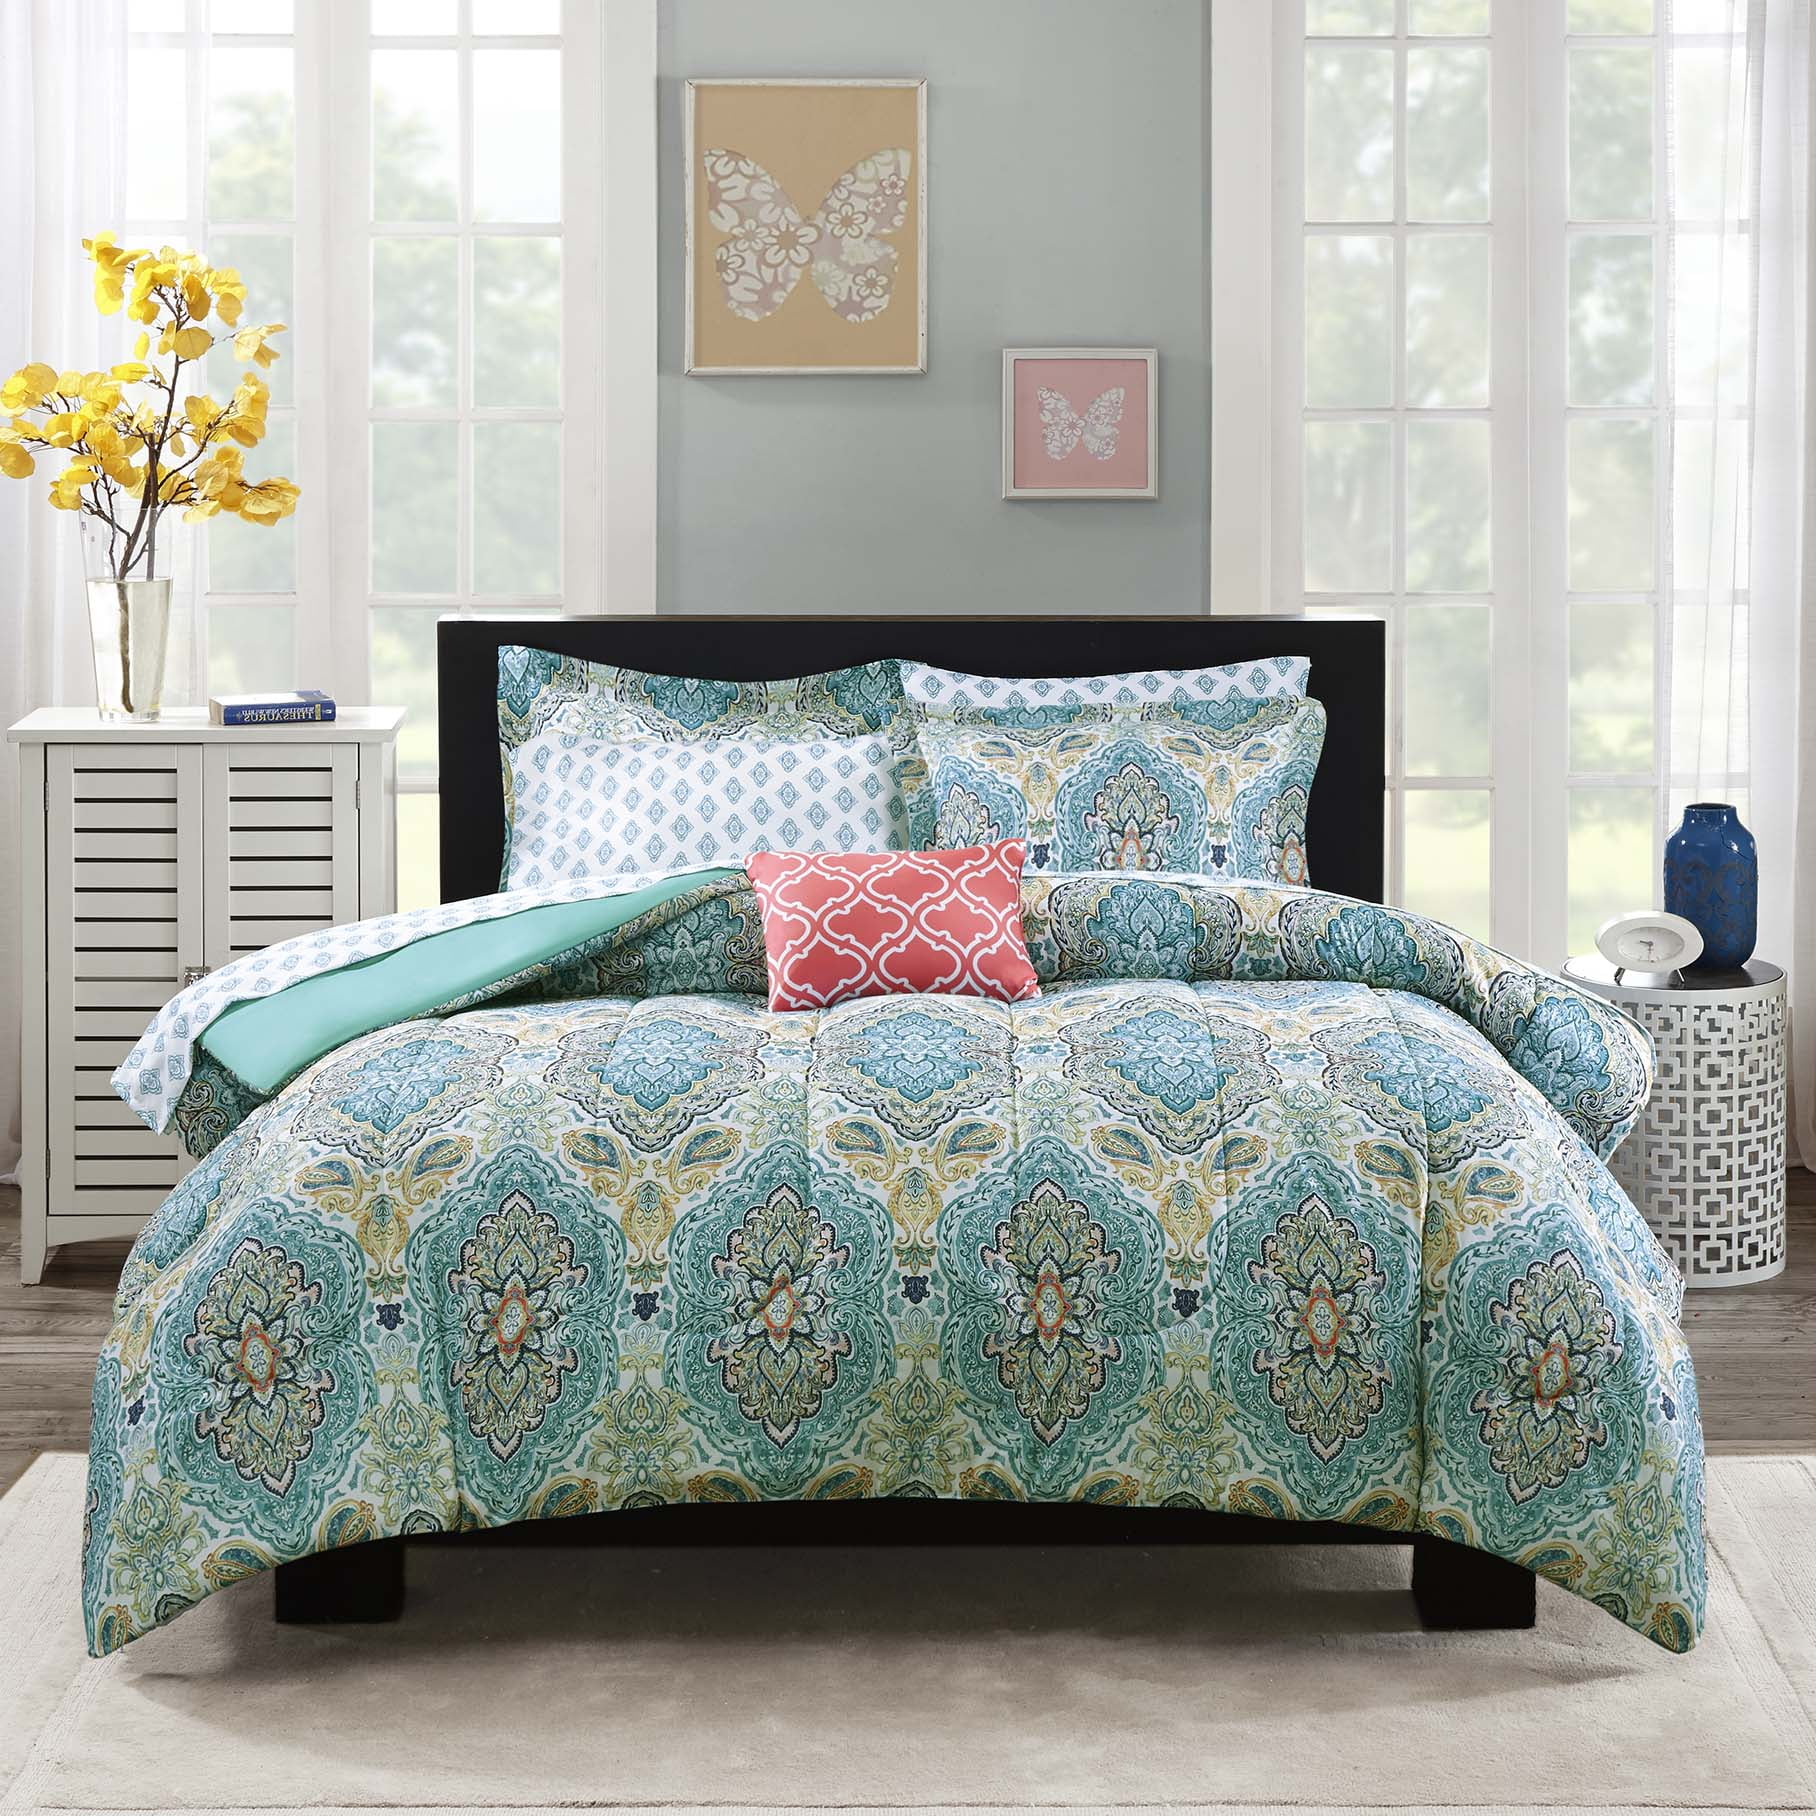 POTTERY BARN DAMASK VALUE 5 PIECE COMFORTER COLLEGE SET TWIN XL POOL/TURQUOISE 